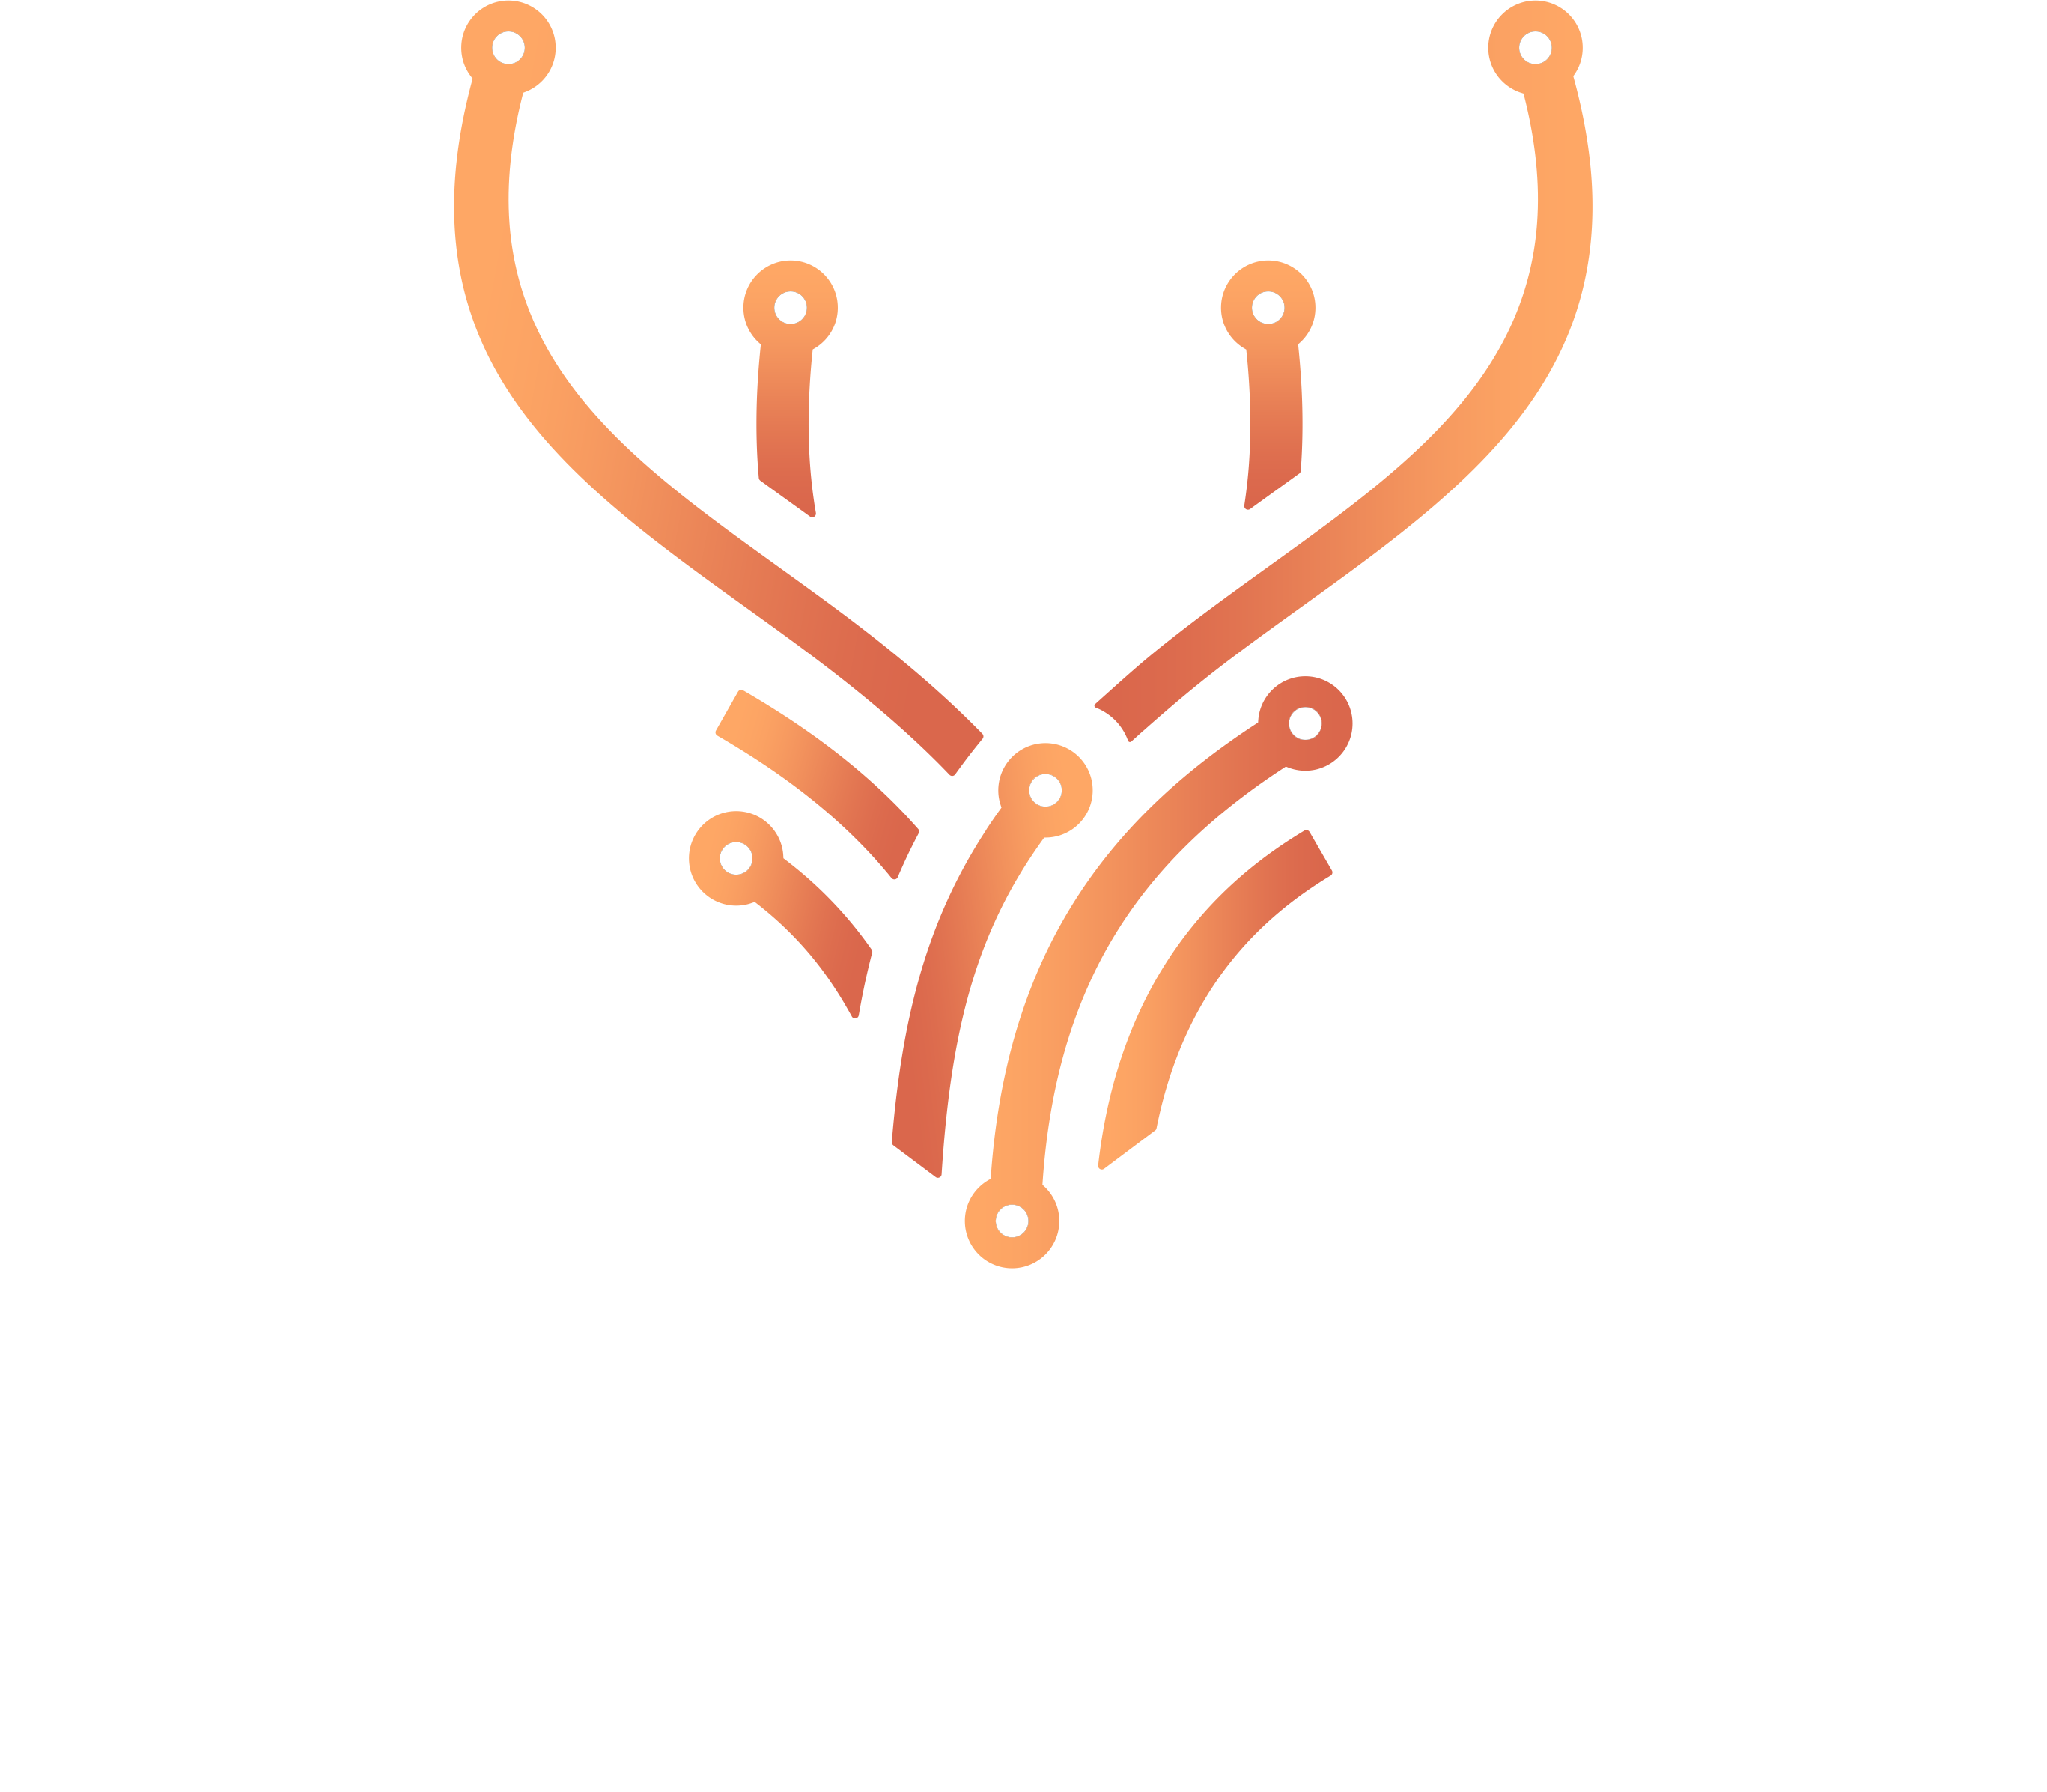 AxioTech Solutions